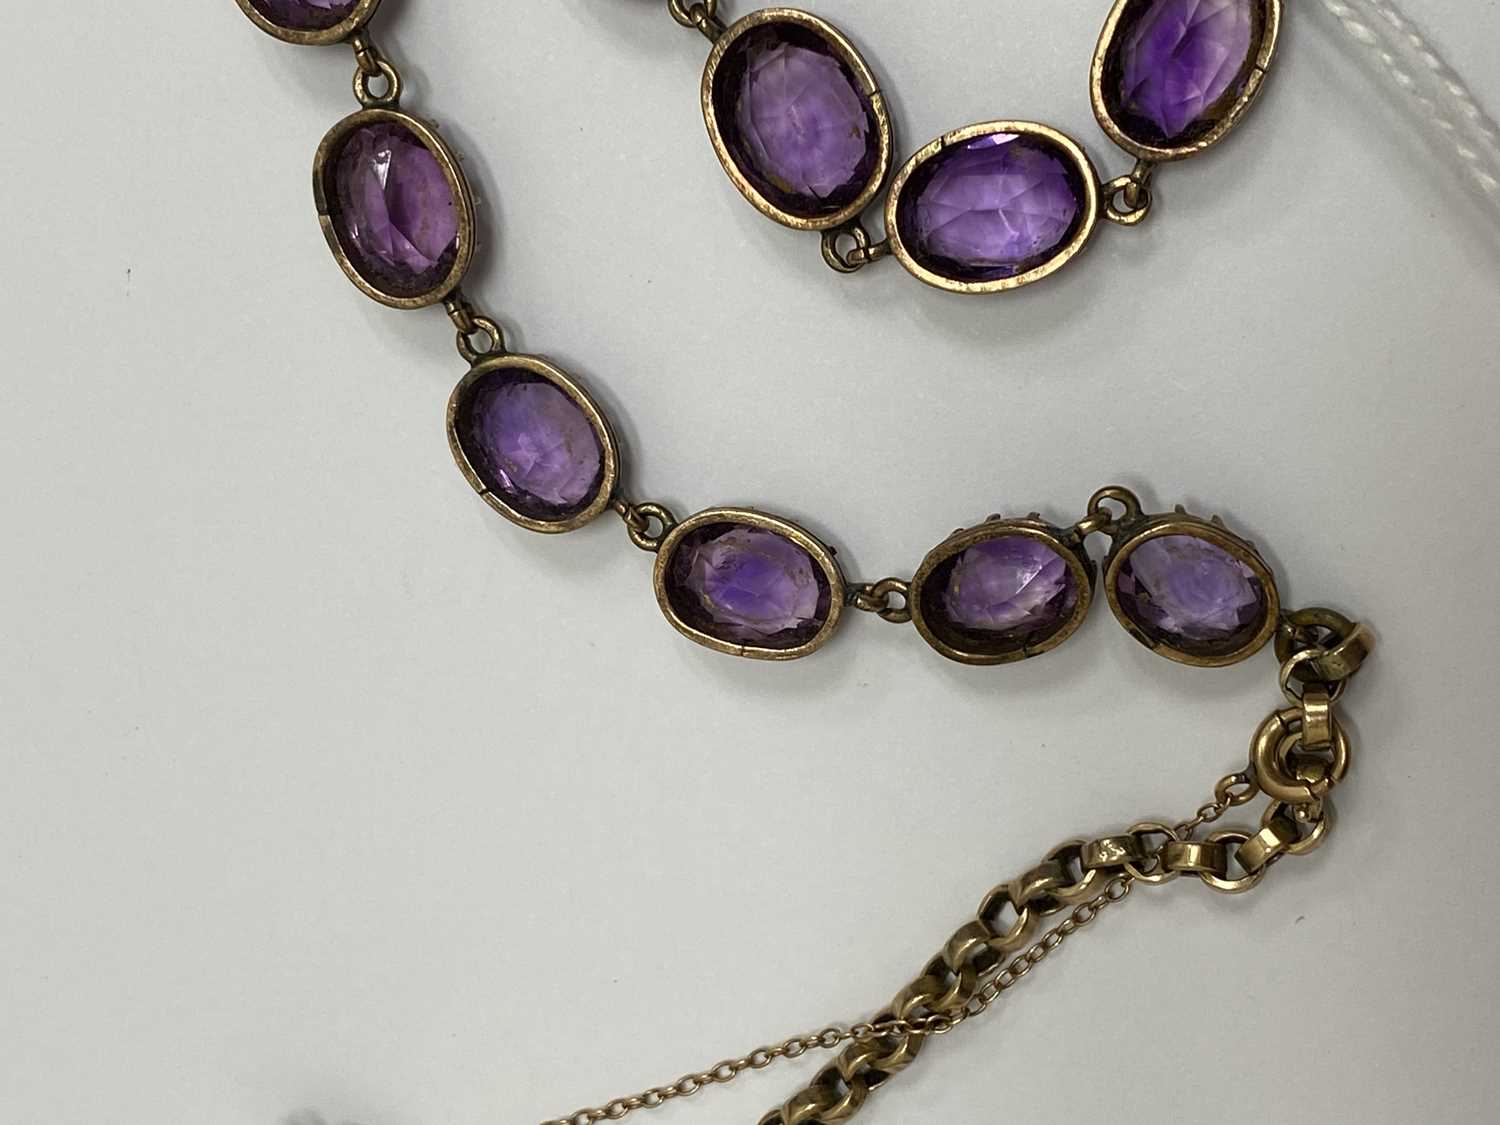 A 19th century amethyst riviere necklace - Image 9 of 9